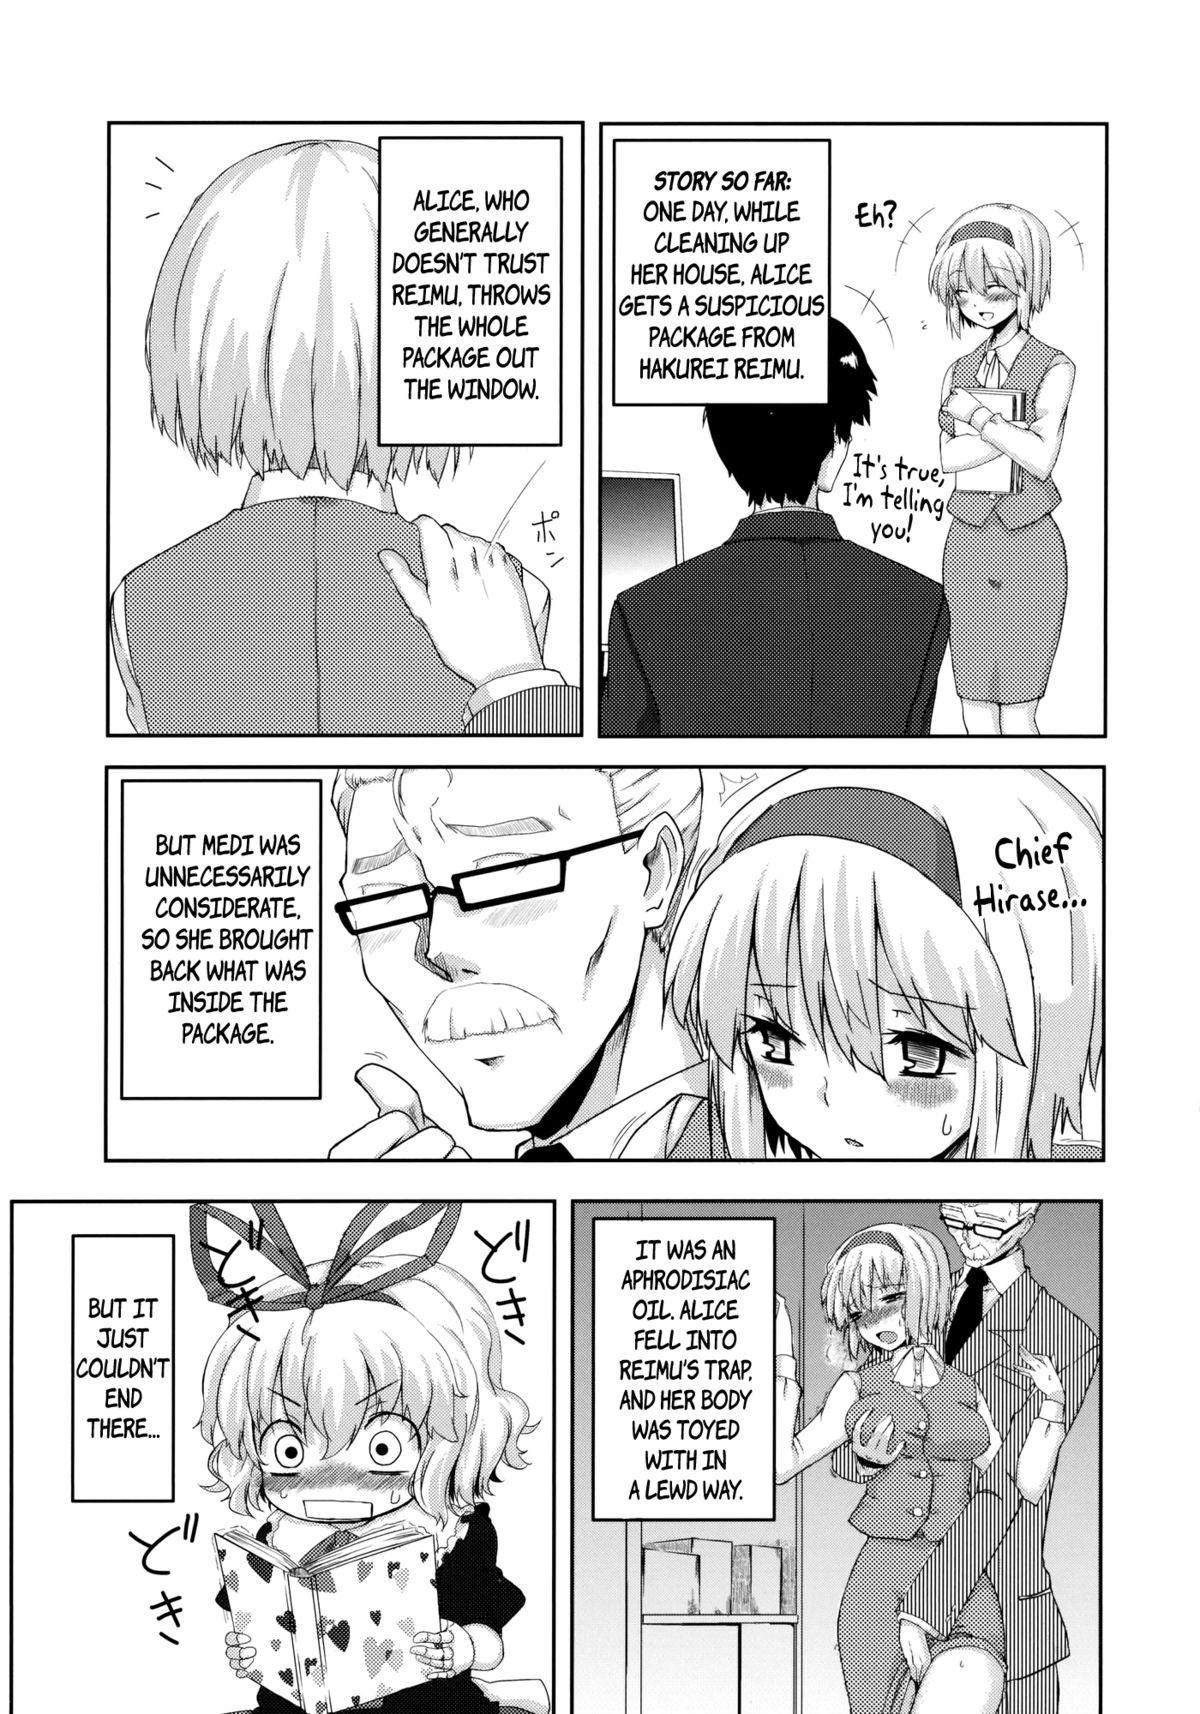 Newbie (C78) [Jalapeno Chips (Uro)] Heart Potion (Touhou Project) [English] {pesu] - Touhou project Family Roleplay - Page 3